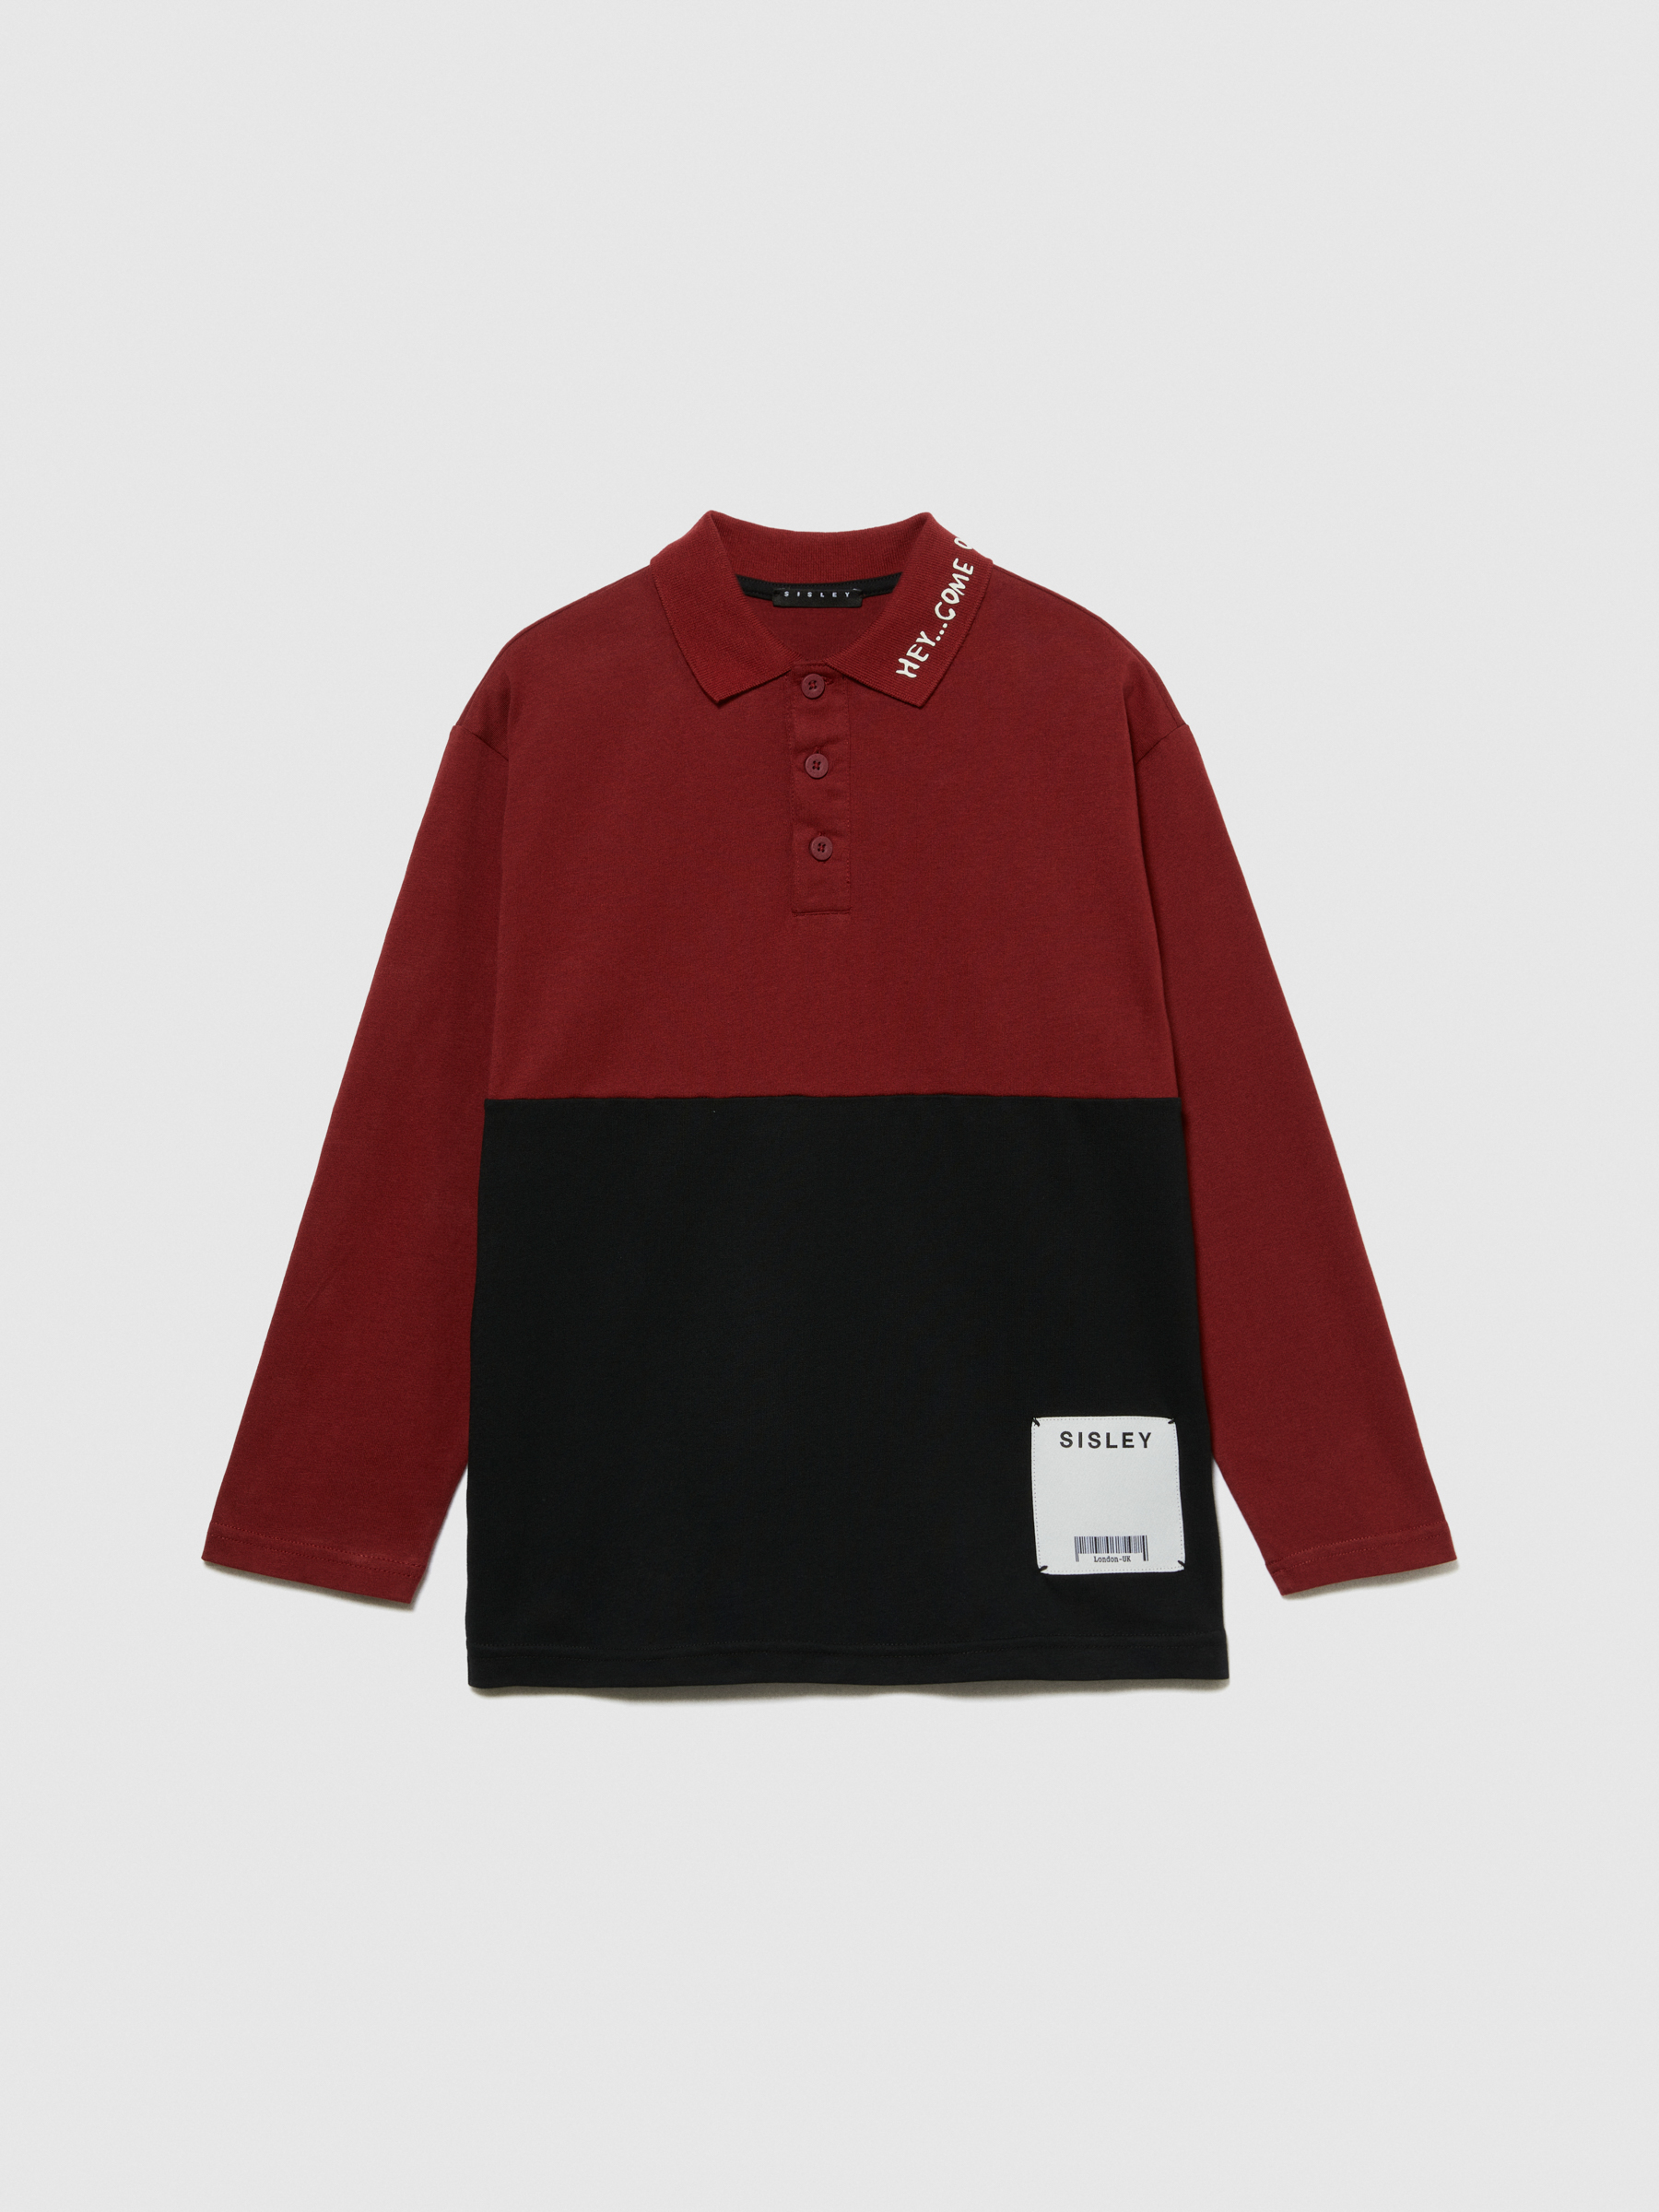 Sisley Young - Color Block Polo, Man, Burgundy, Size: L